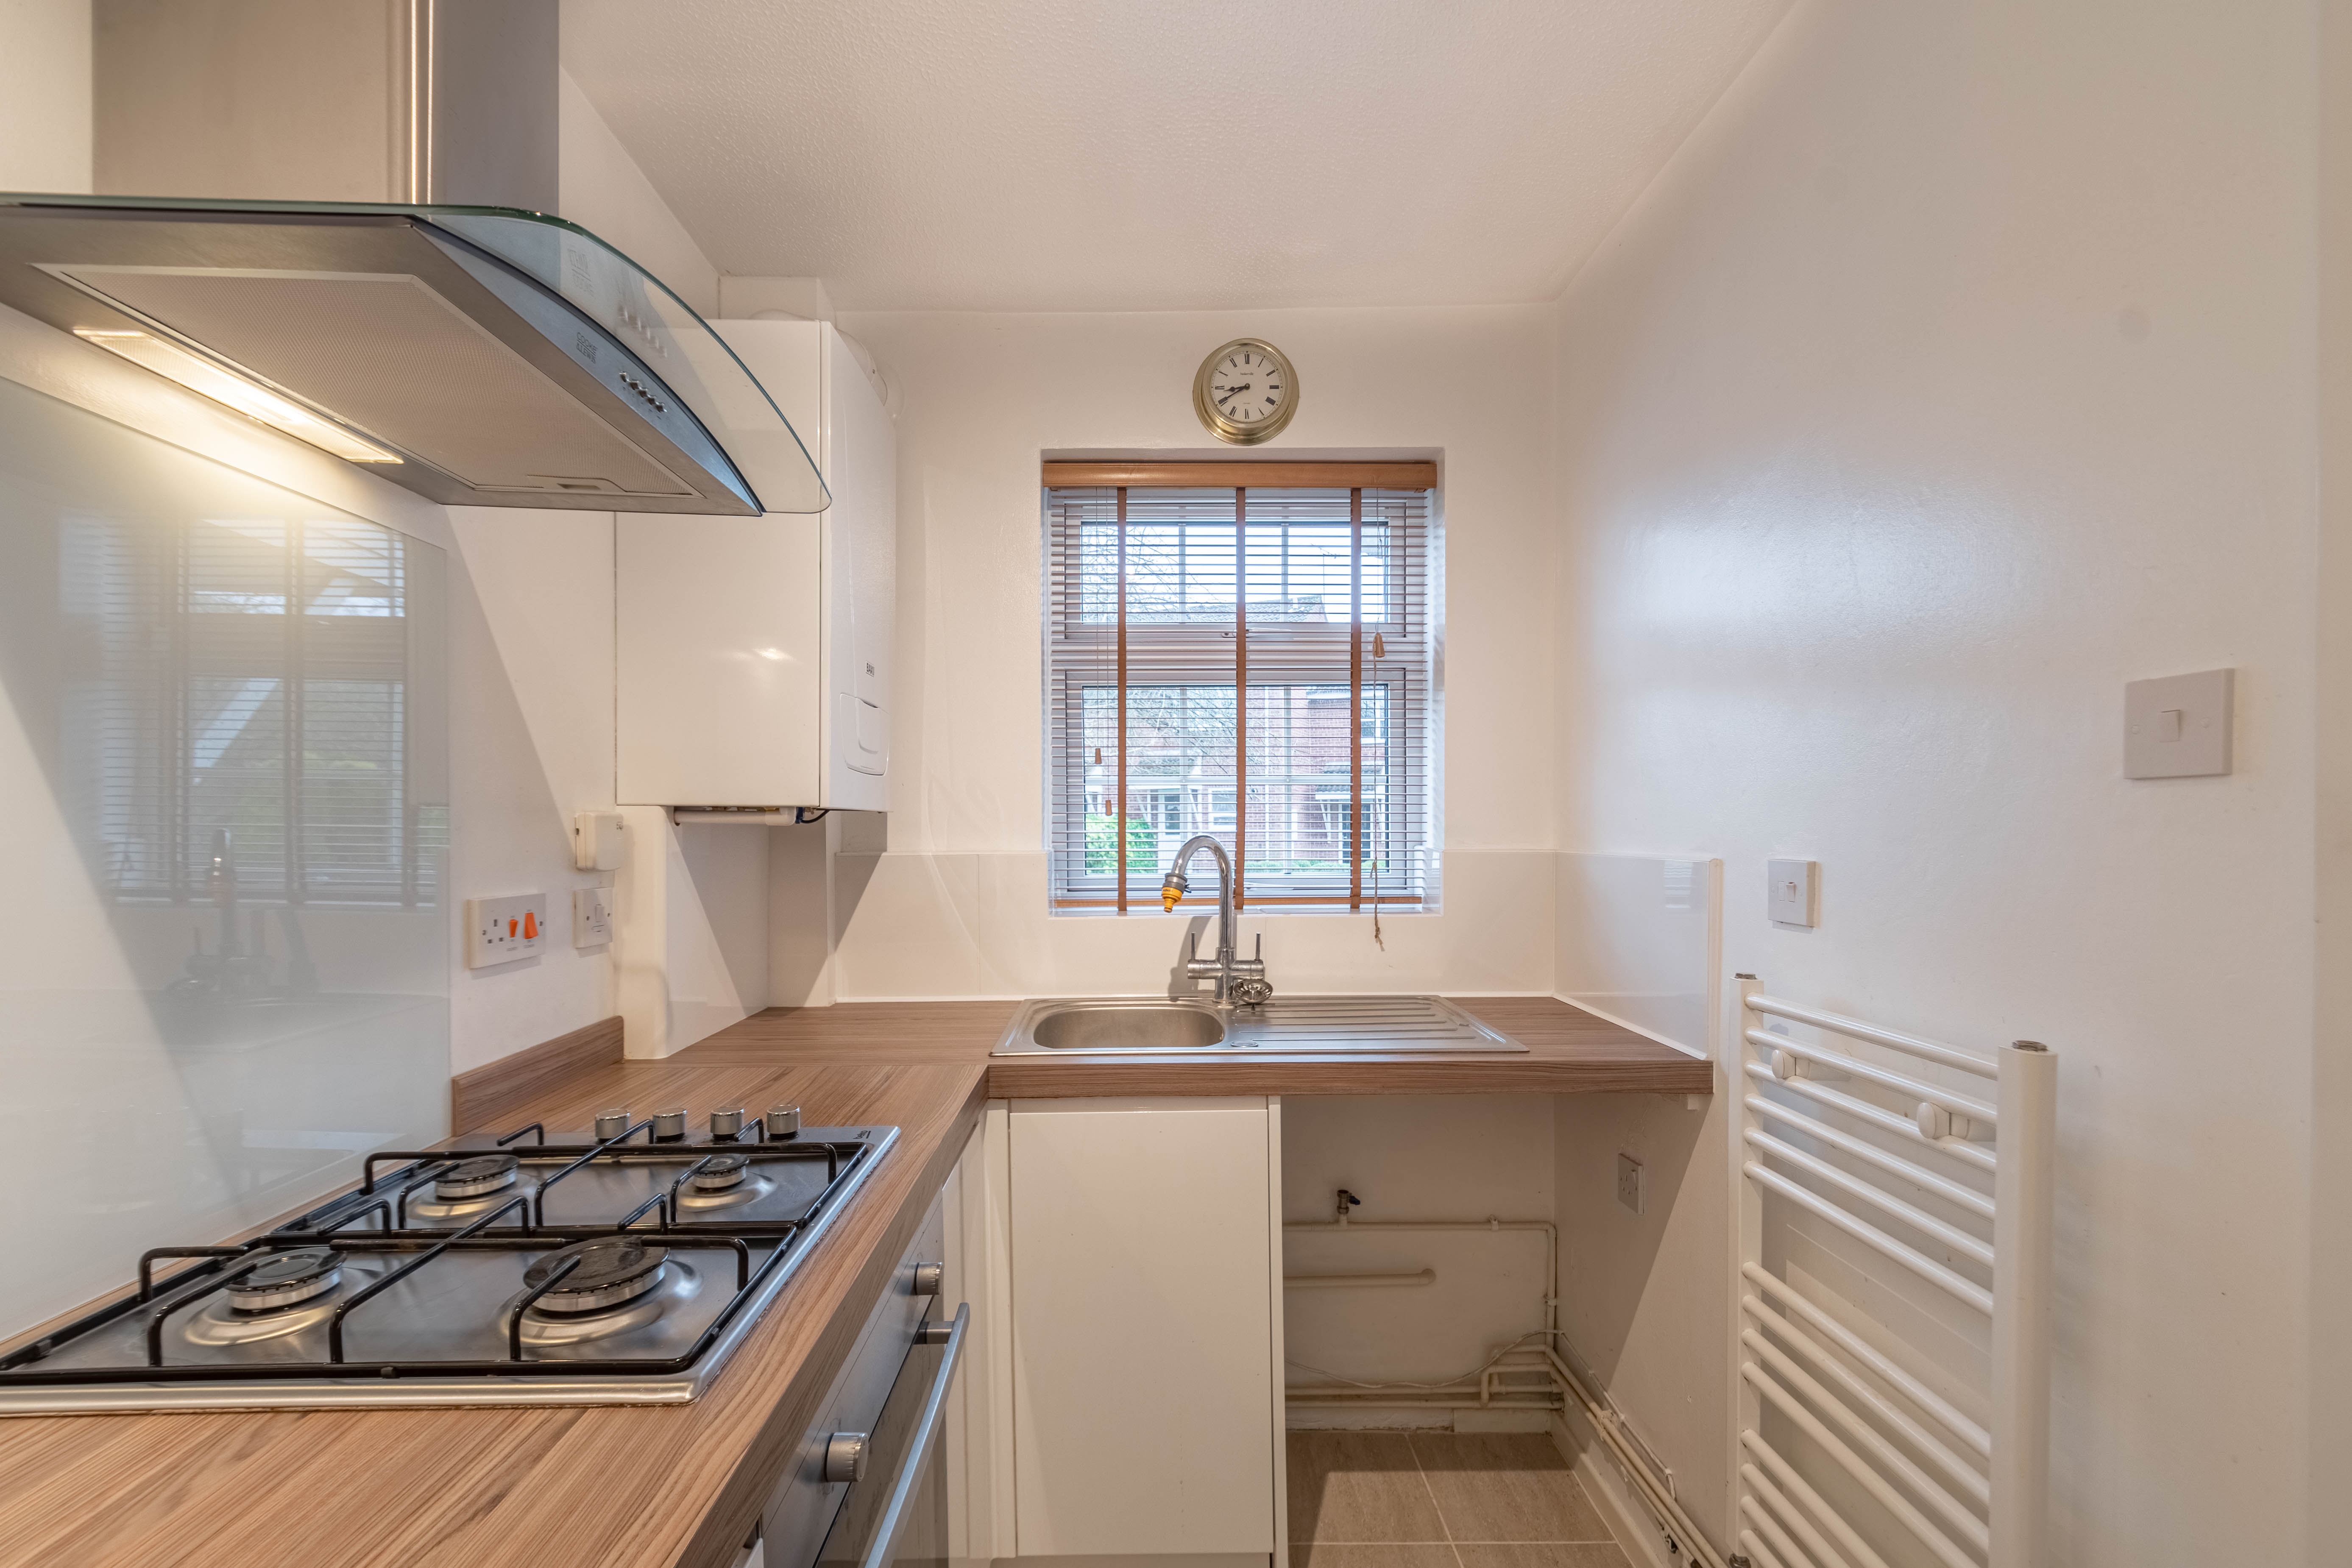 2 bed house for sale in Abbotswood Close, Winyates Green  - Property Image 4